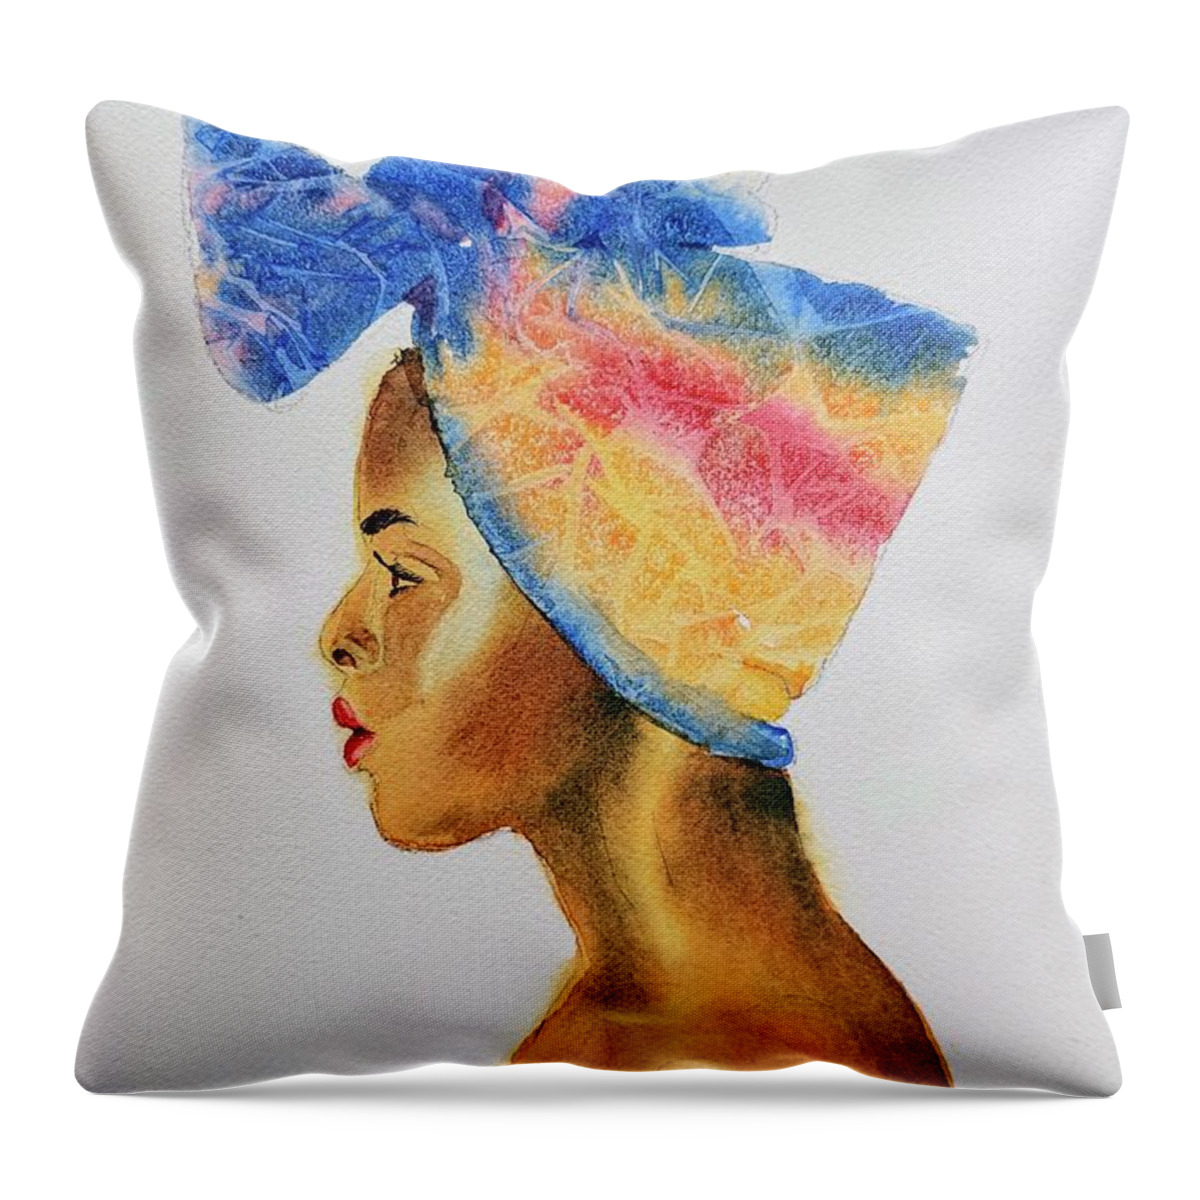 Black Woman Throw Pillow featuring the painting Wrapped by Sandie Croft